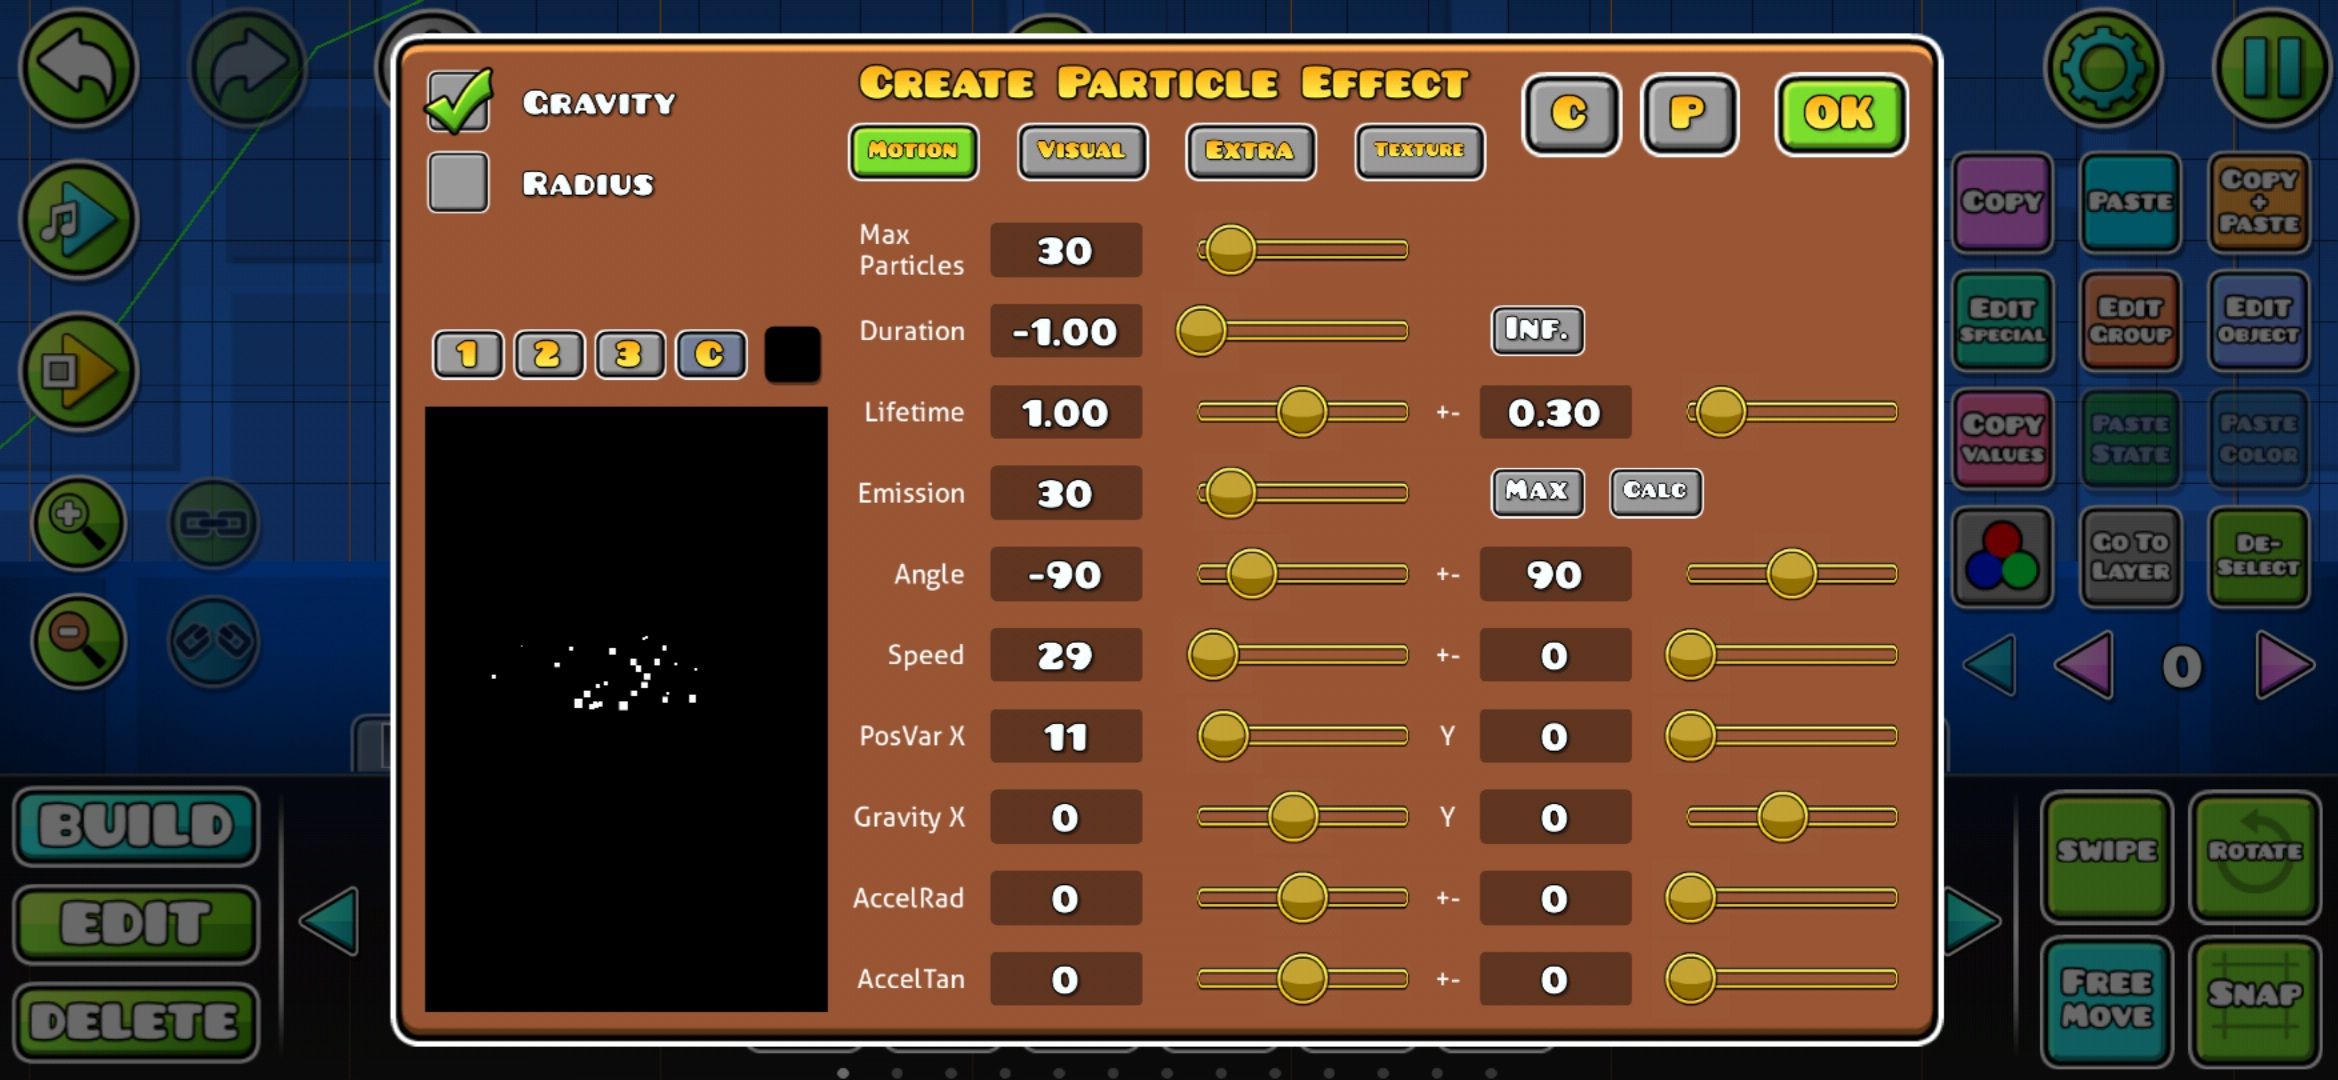 effects in Particle Editor in Geometry Dash